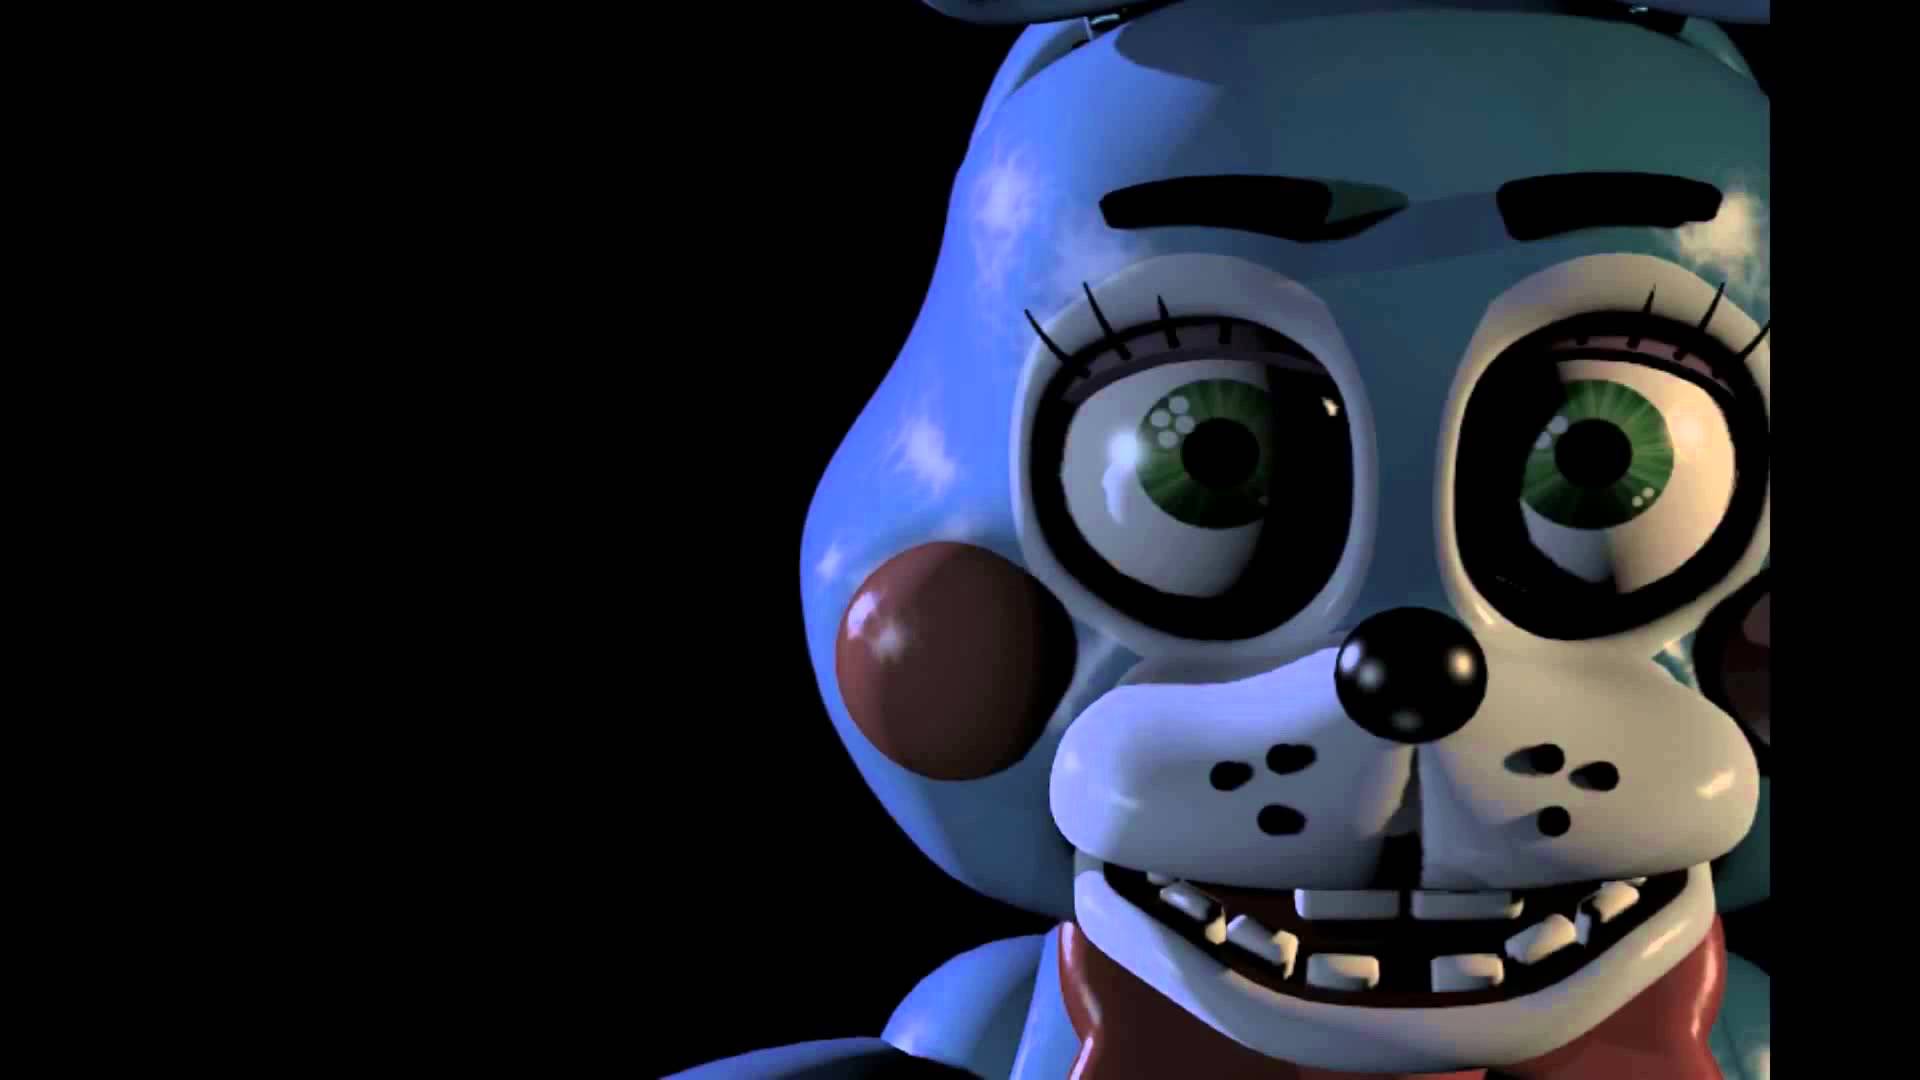 Five Nights at Freddys 2 OFFICIAL Trailer